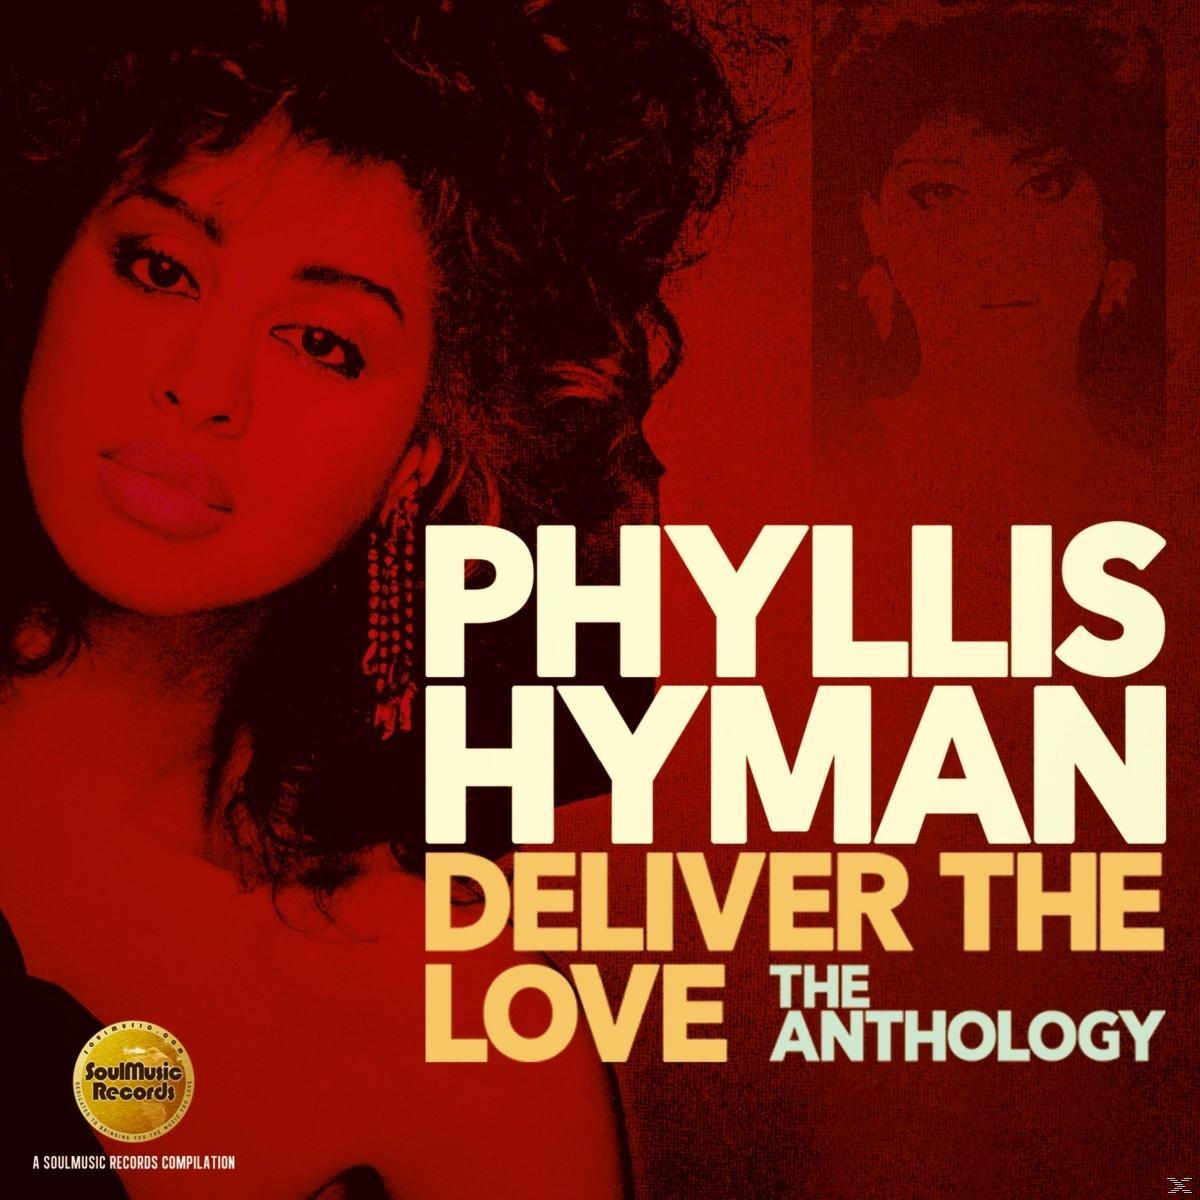 Phyllis Hyman - Love-The - (CD) The Anthology Deliver